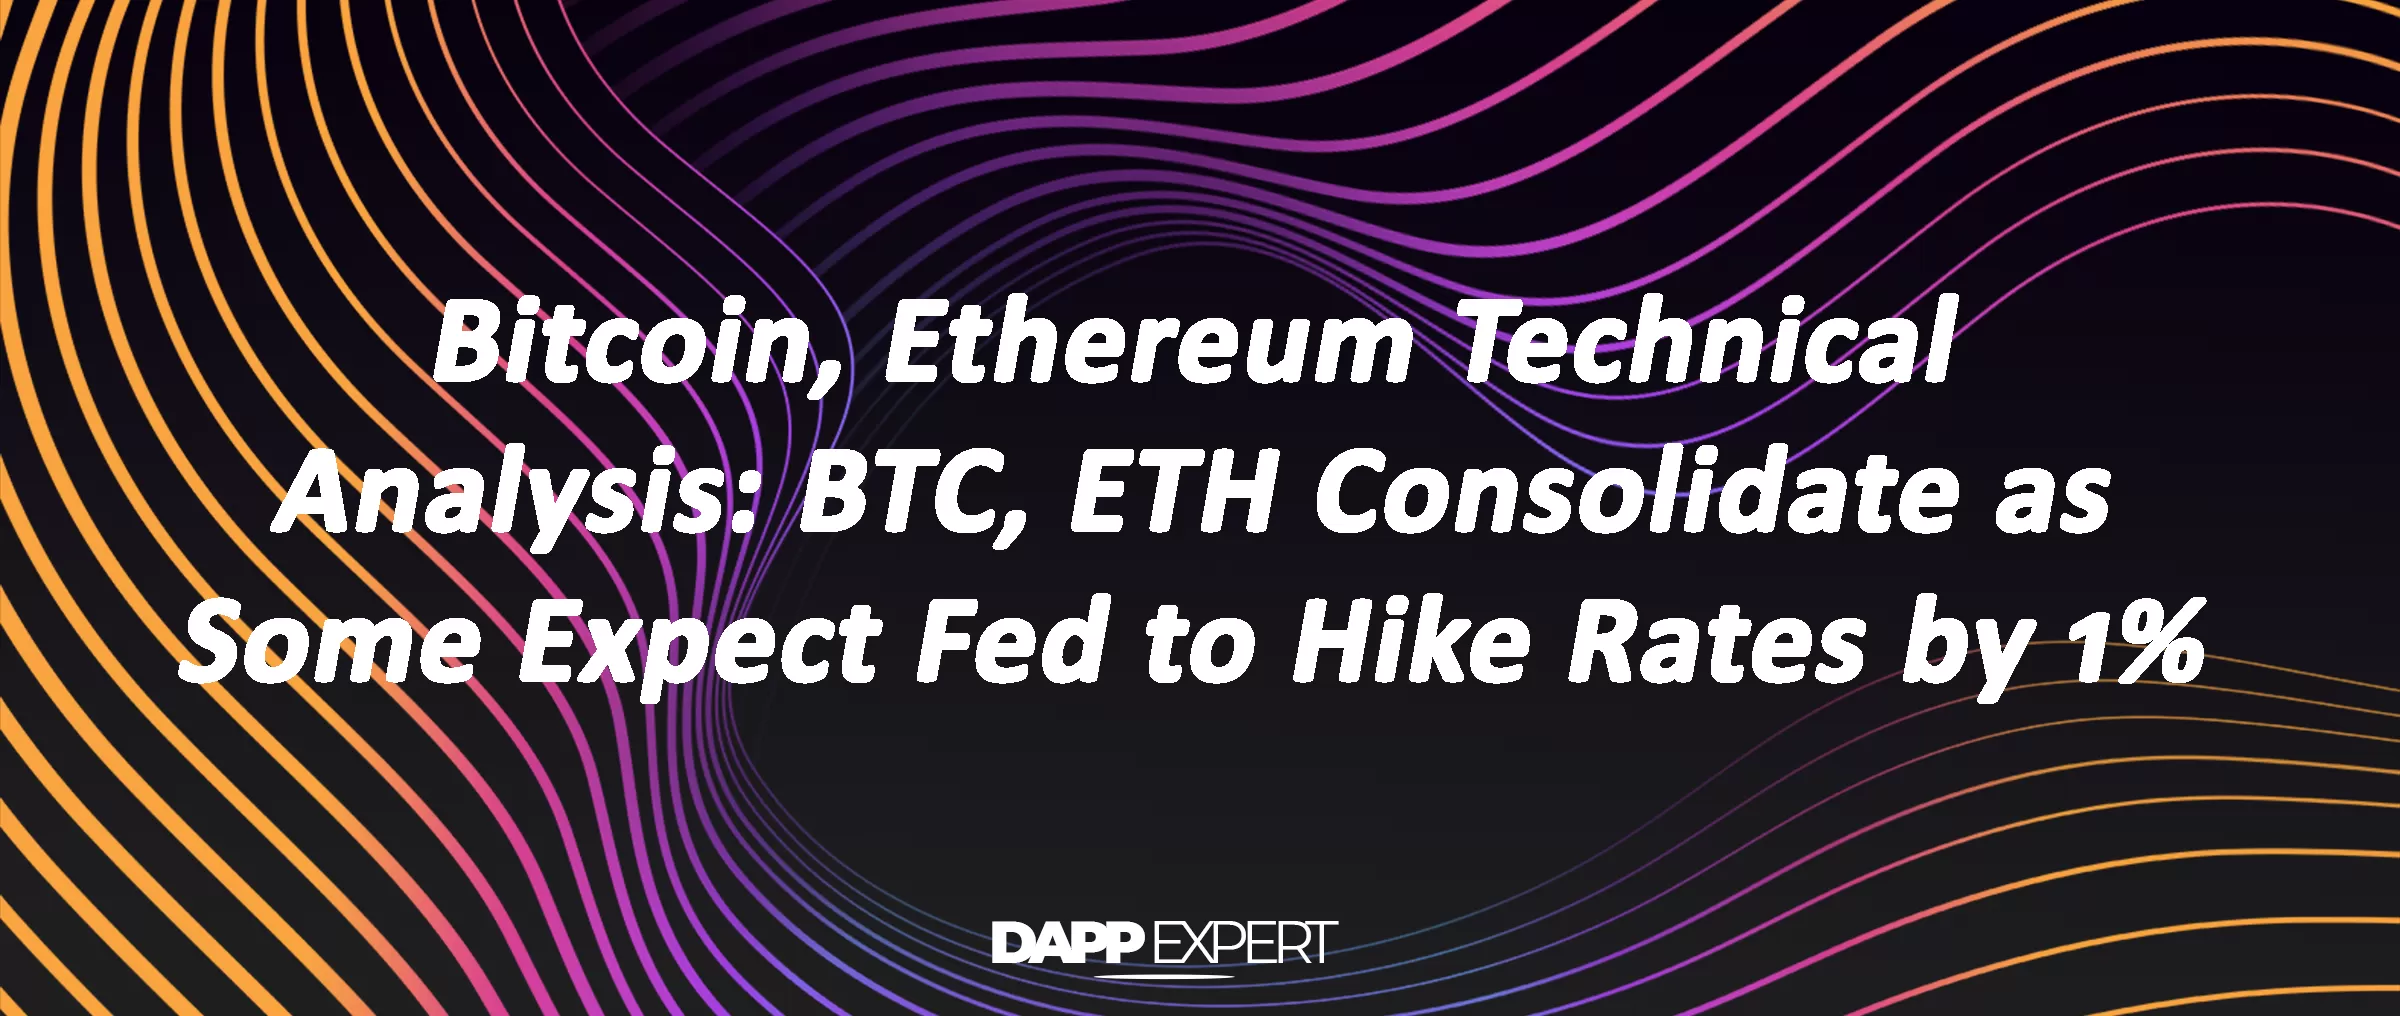 Bitcoin, Ethereum Technical Analysis: BTC, ETH Consolidate as Some Expect Fed to Hike Rates by 1%